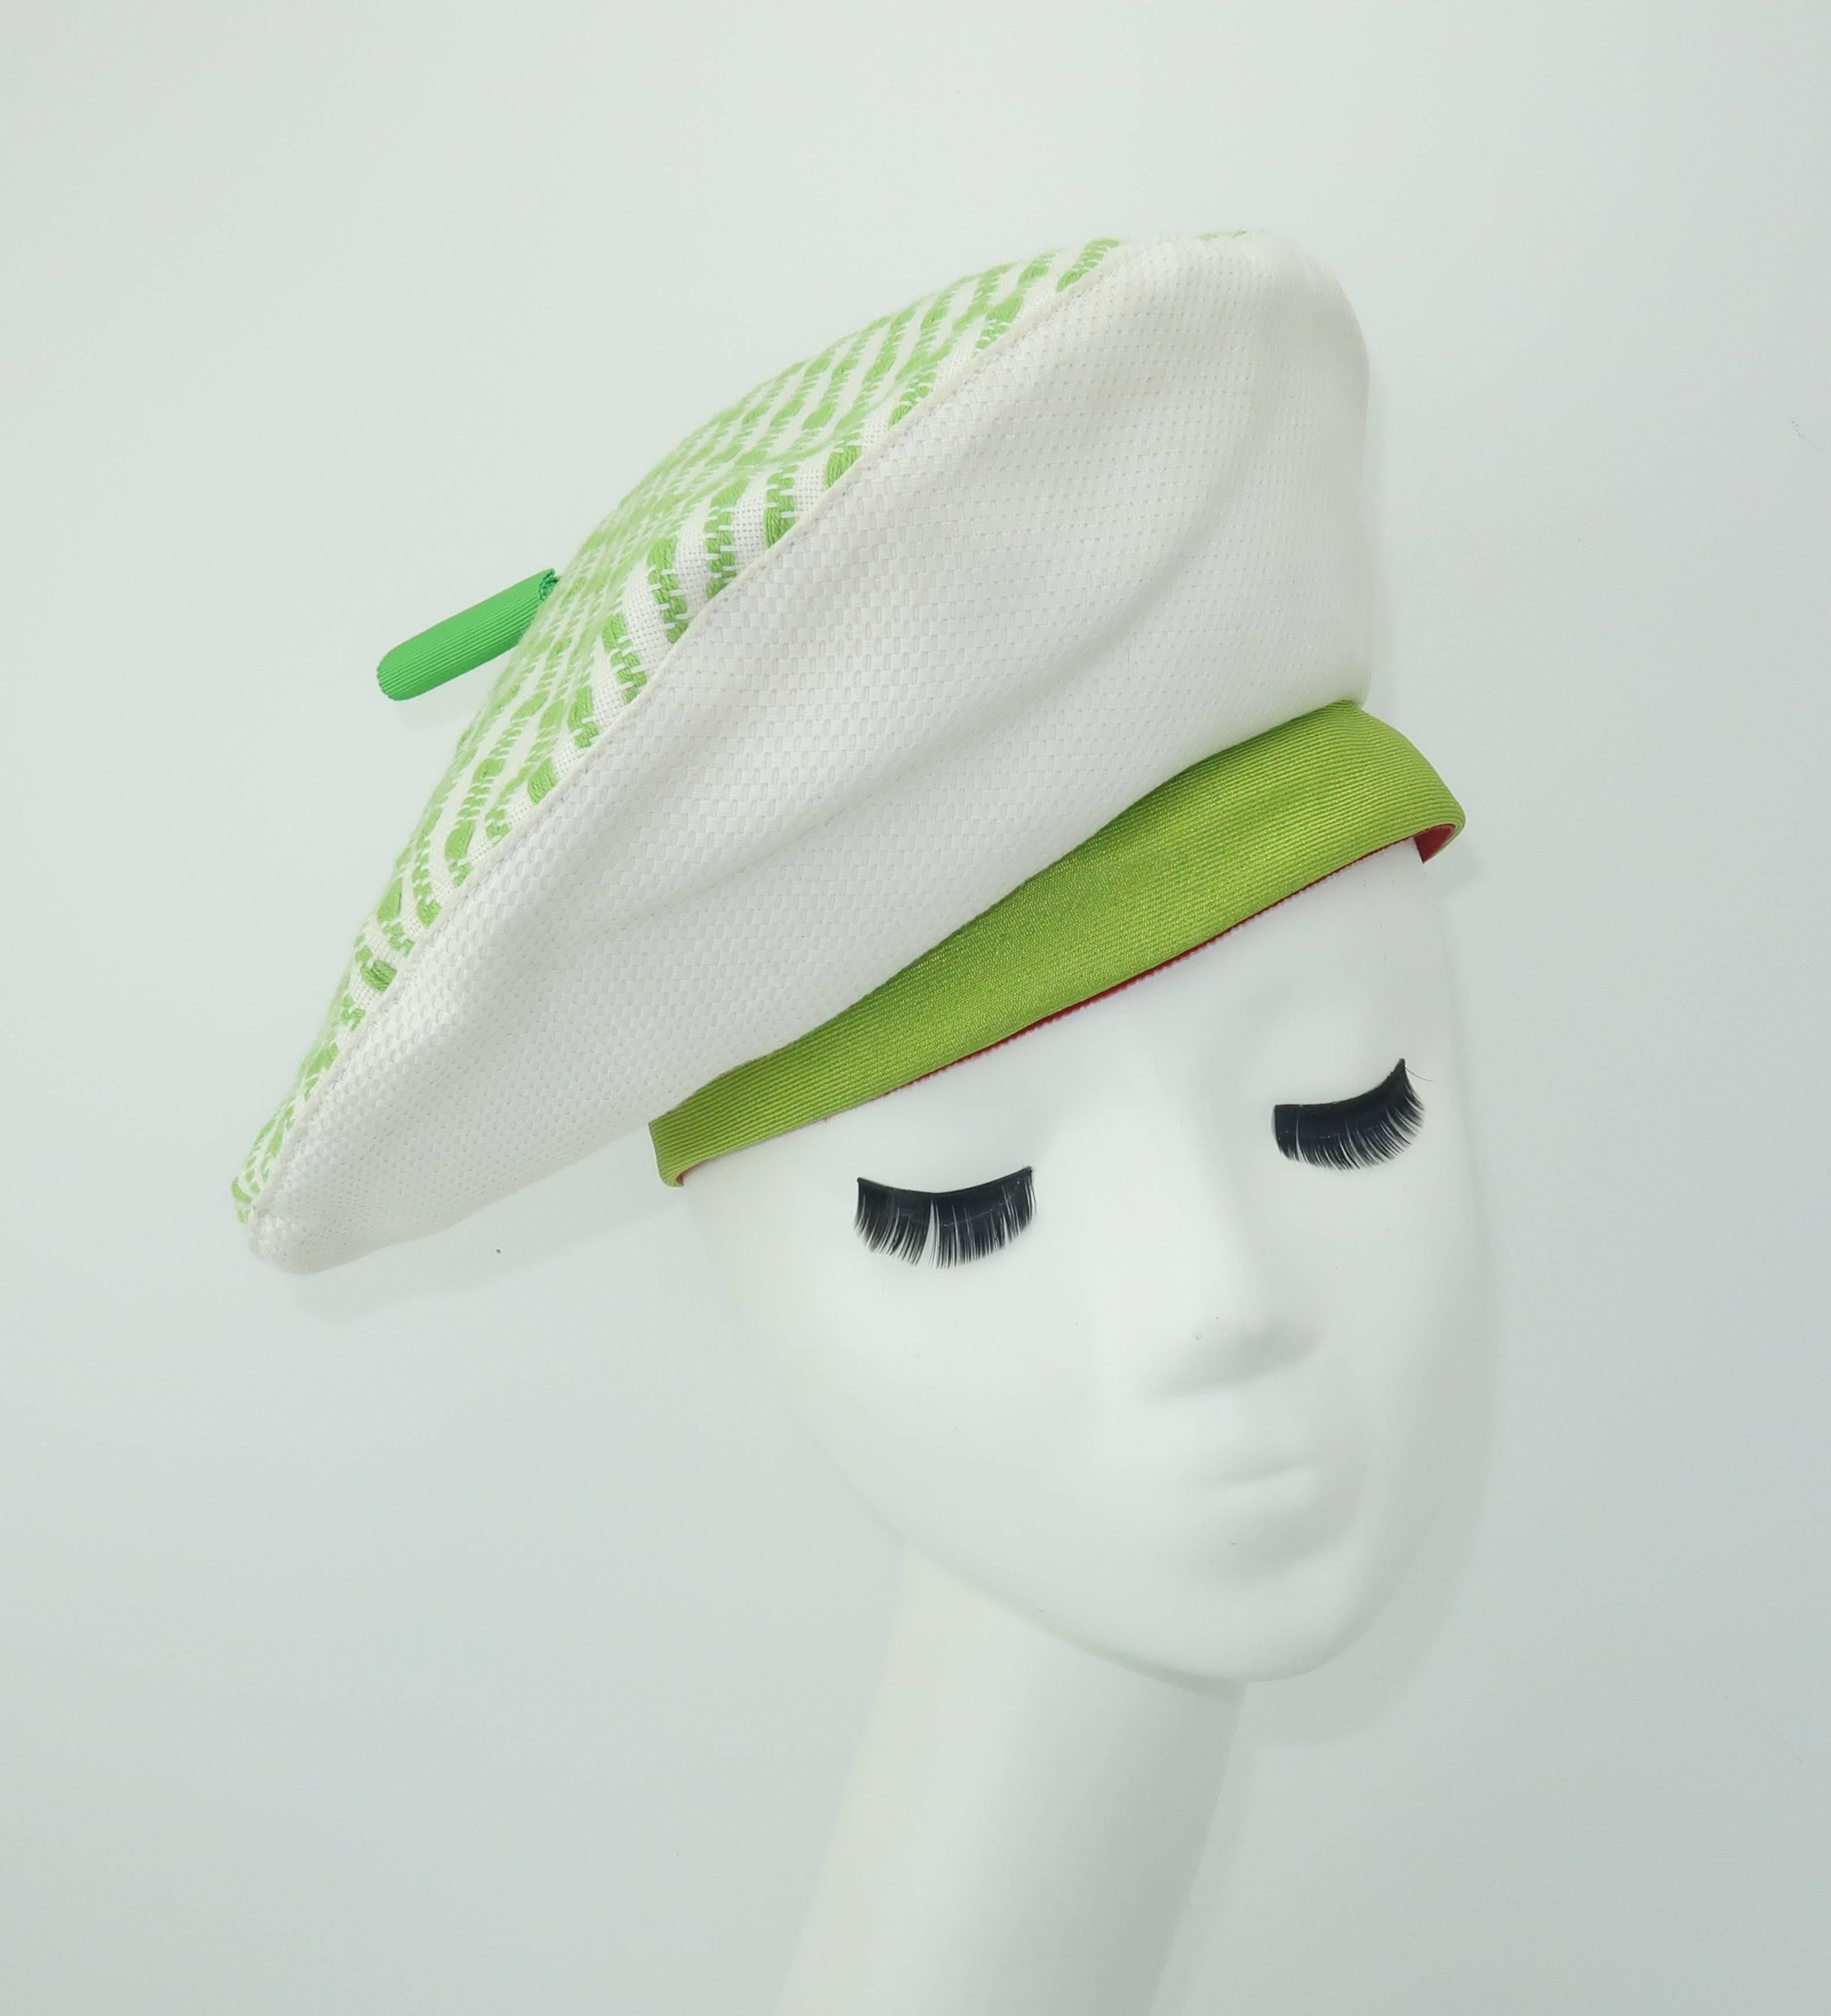 This whimsical beret designed by John Harberger for his millinery line, Mr. John Classic, has a crisp summery aesthetic.  The white cotton pique body is decorated with a bright green rim, a textured green pattern at the crown and a 2.25